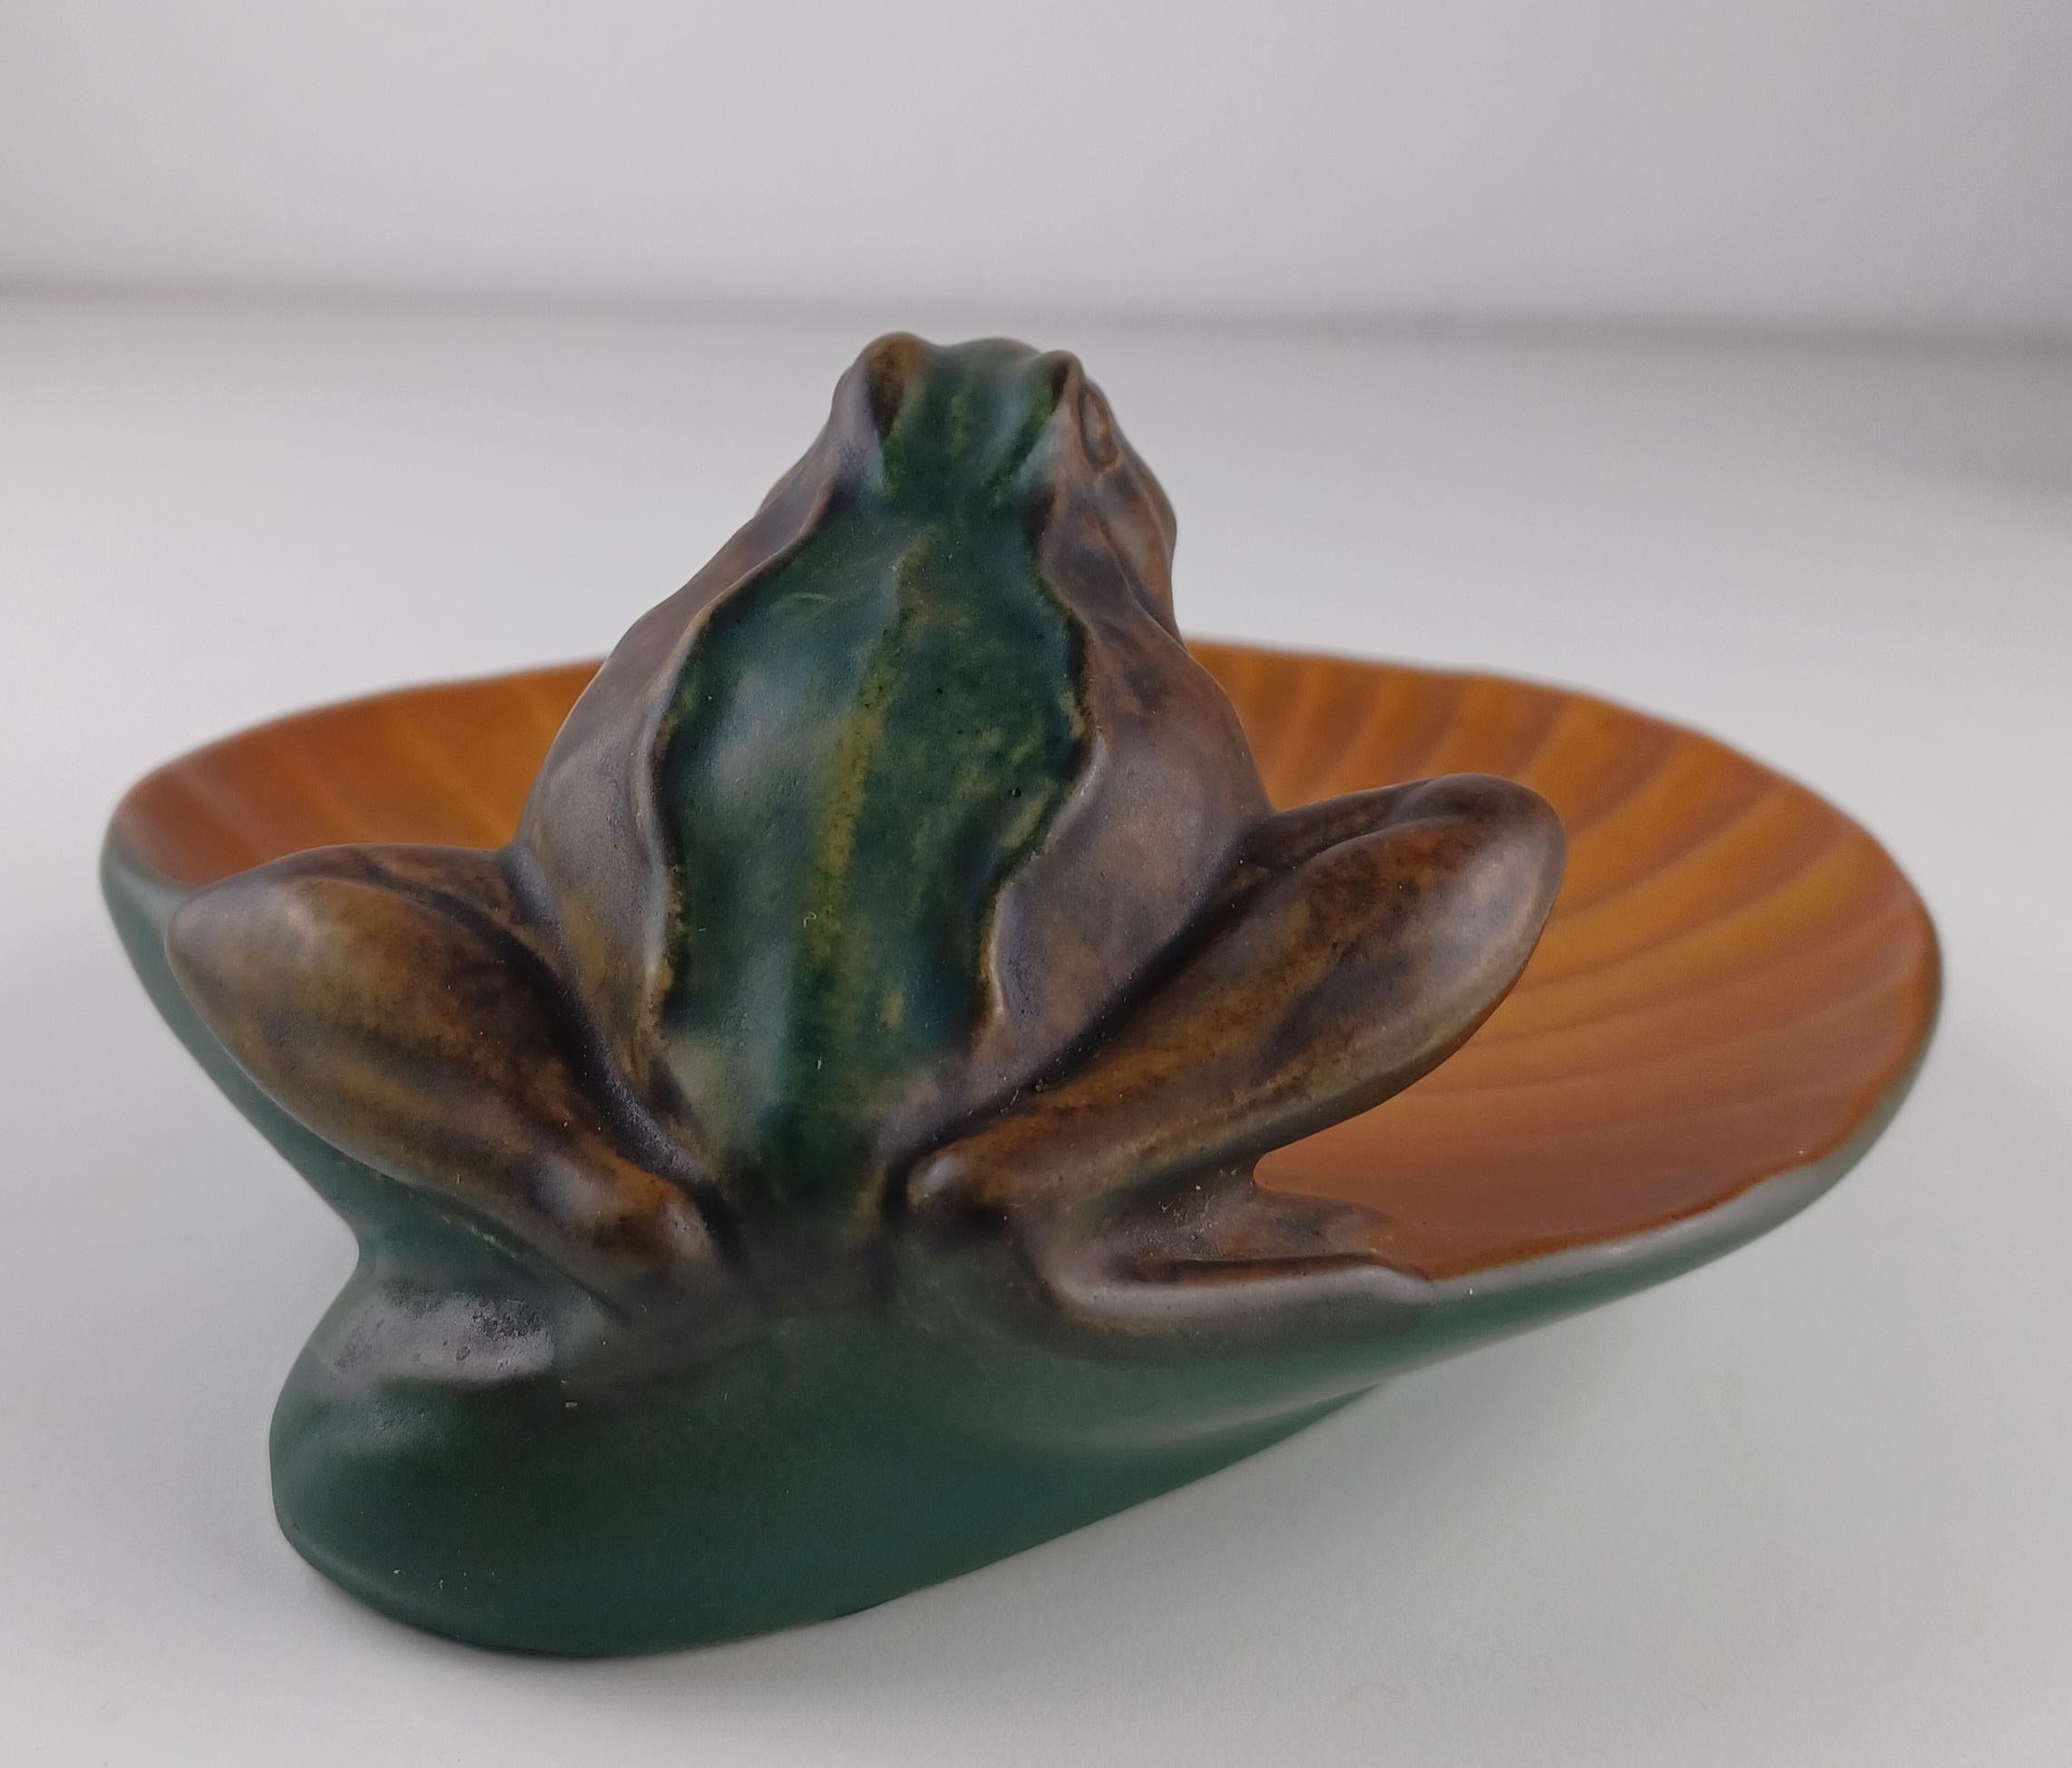 1920's Small Handcrafed Danish Art Nouveau Handcrafted Frog Dish by Ipsens Enke In Good Condition For Sale In Knebel, DK